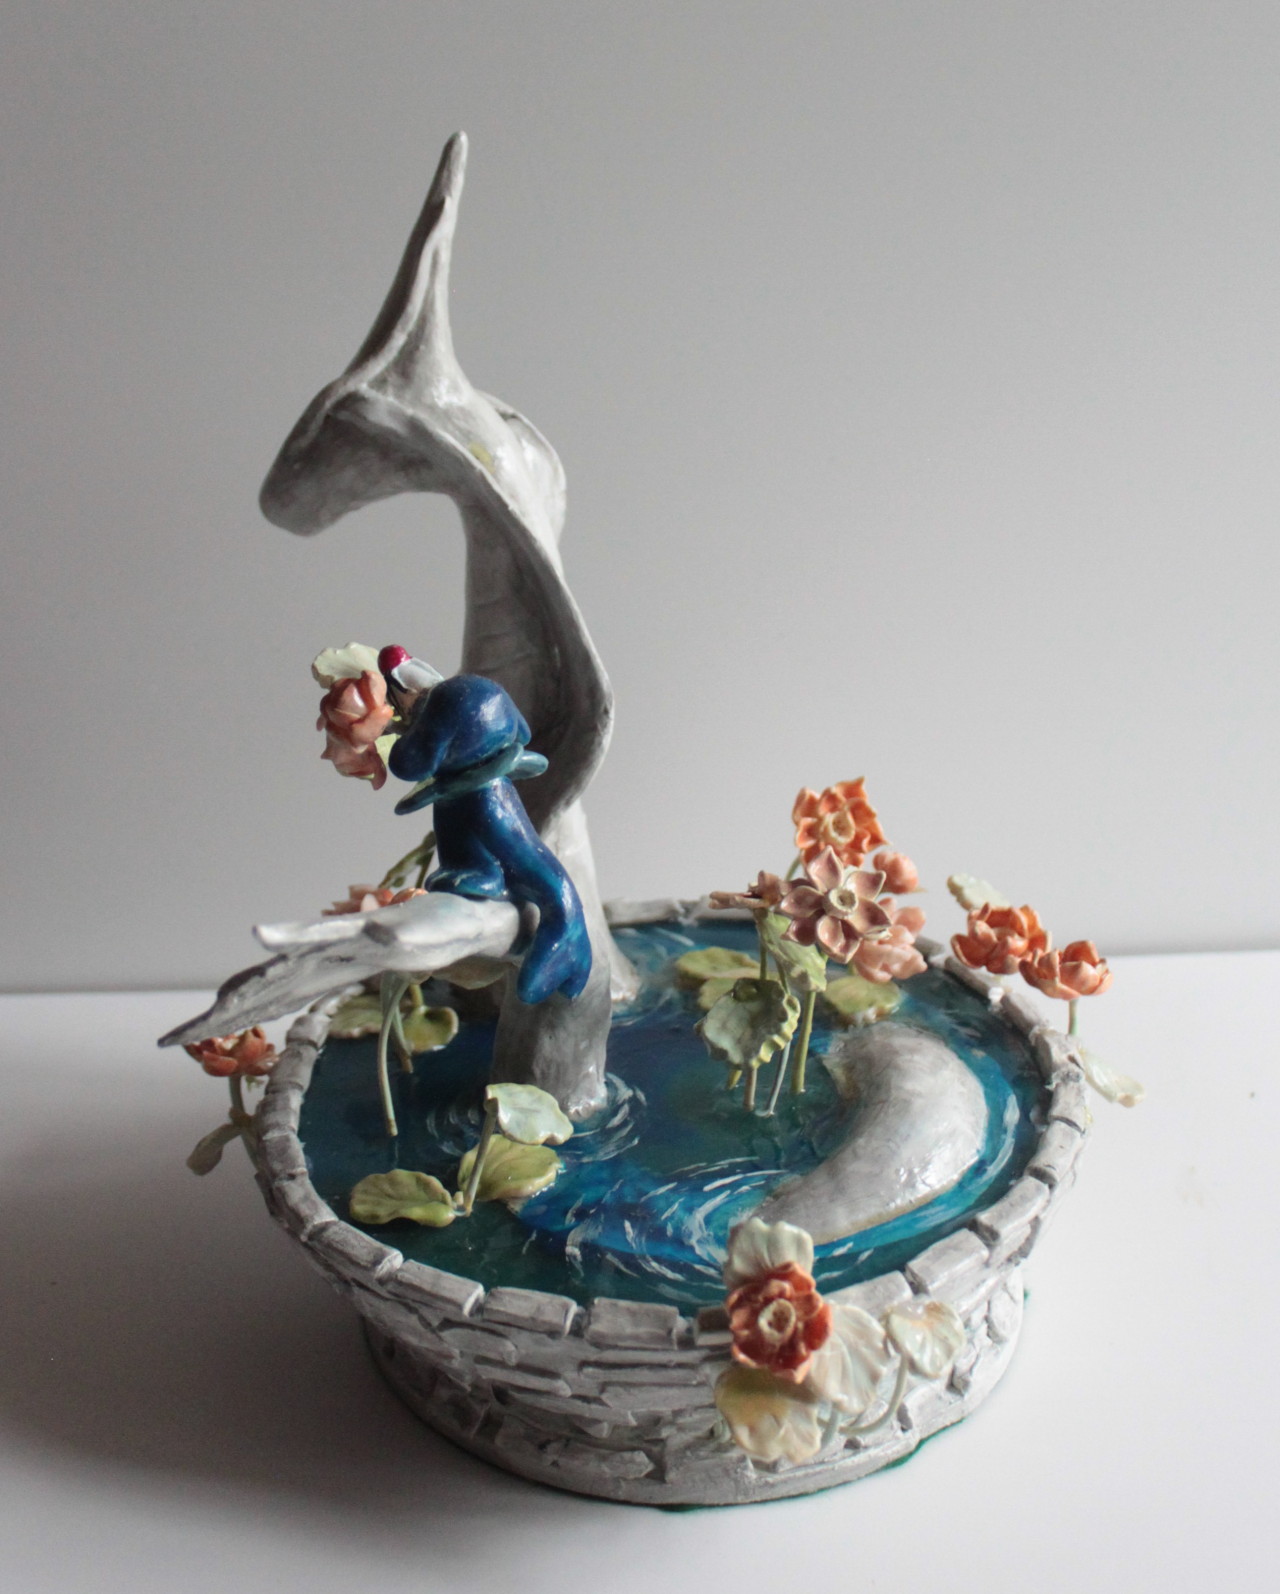 I forgot to poste this(again)... i Am way to lazy whit this  blog. time to change it (again). 

A figurine made from a mix of Polymer clay , Traditional Clay, and resin. Heavy as all get out. but whit a nice felt bottom to not scratch any surface it stands on.   #pokemon#milotic#fountain#fairy#popplio#lotus#figurine#gamergeek#kawaii#handmade#Alola